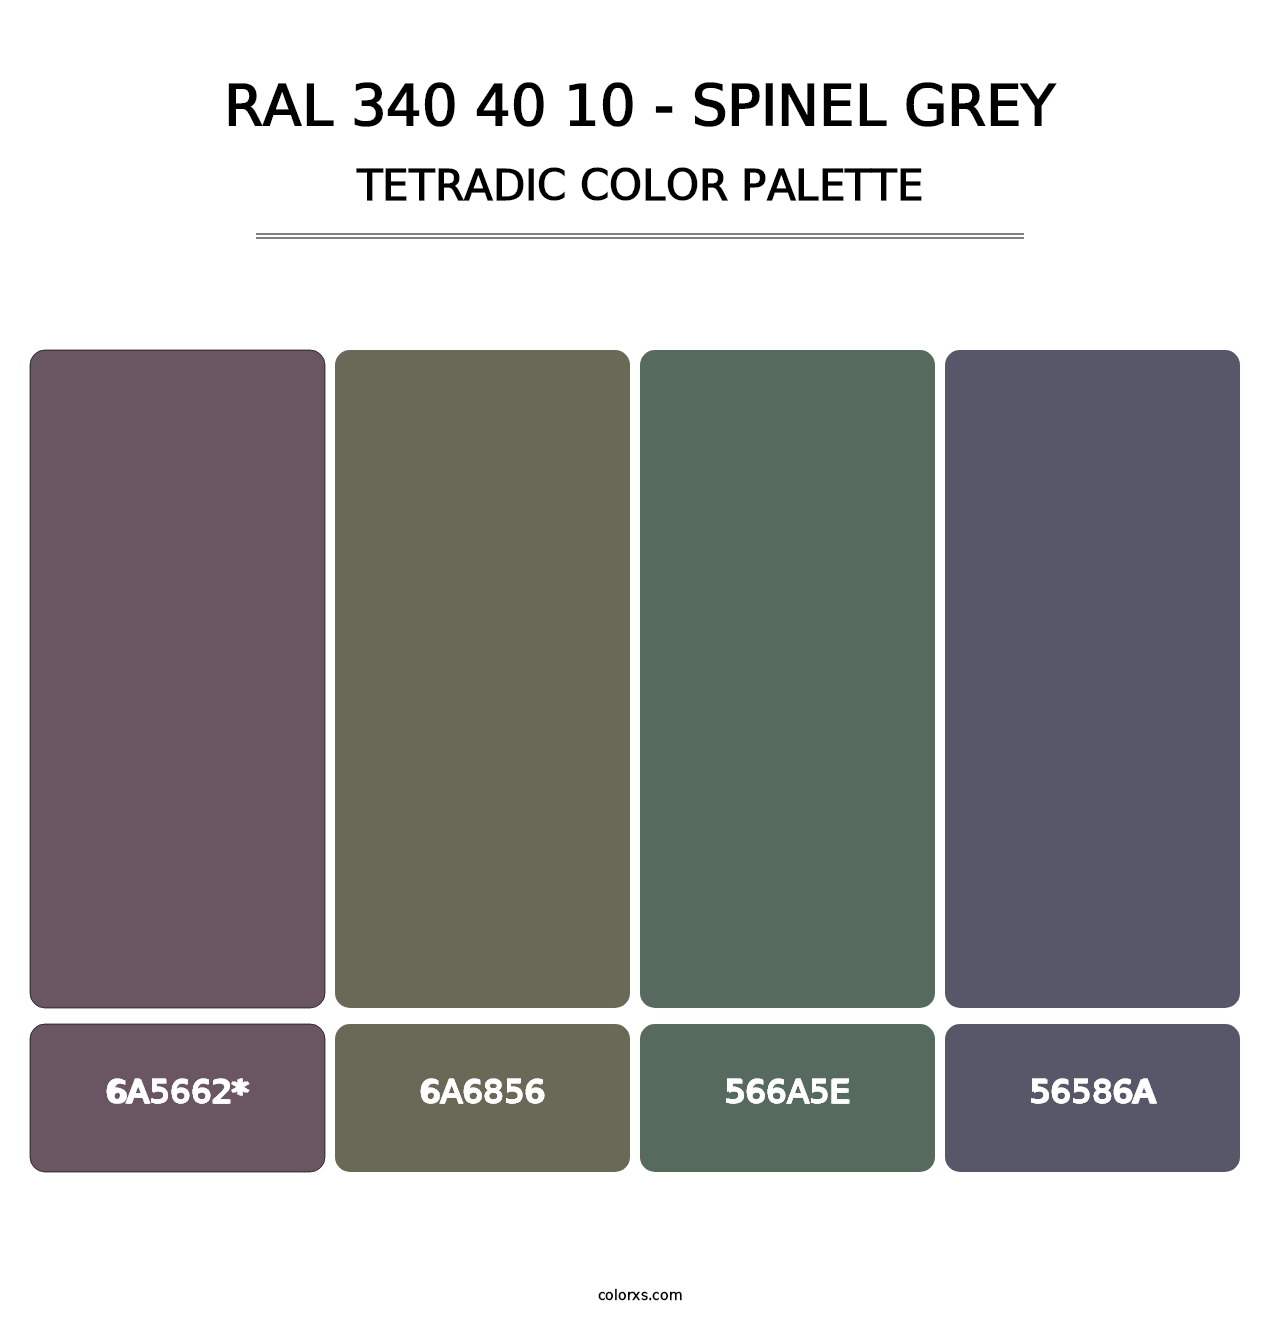 RAL 340 40 10 - Spinel Grey - Tetradic Color Palette